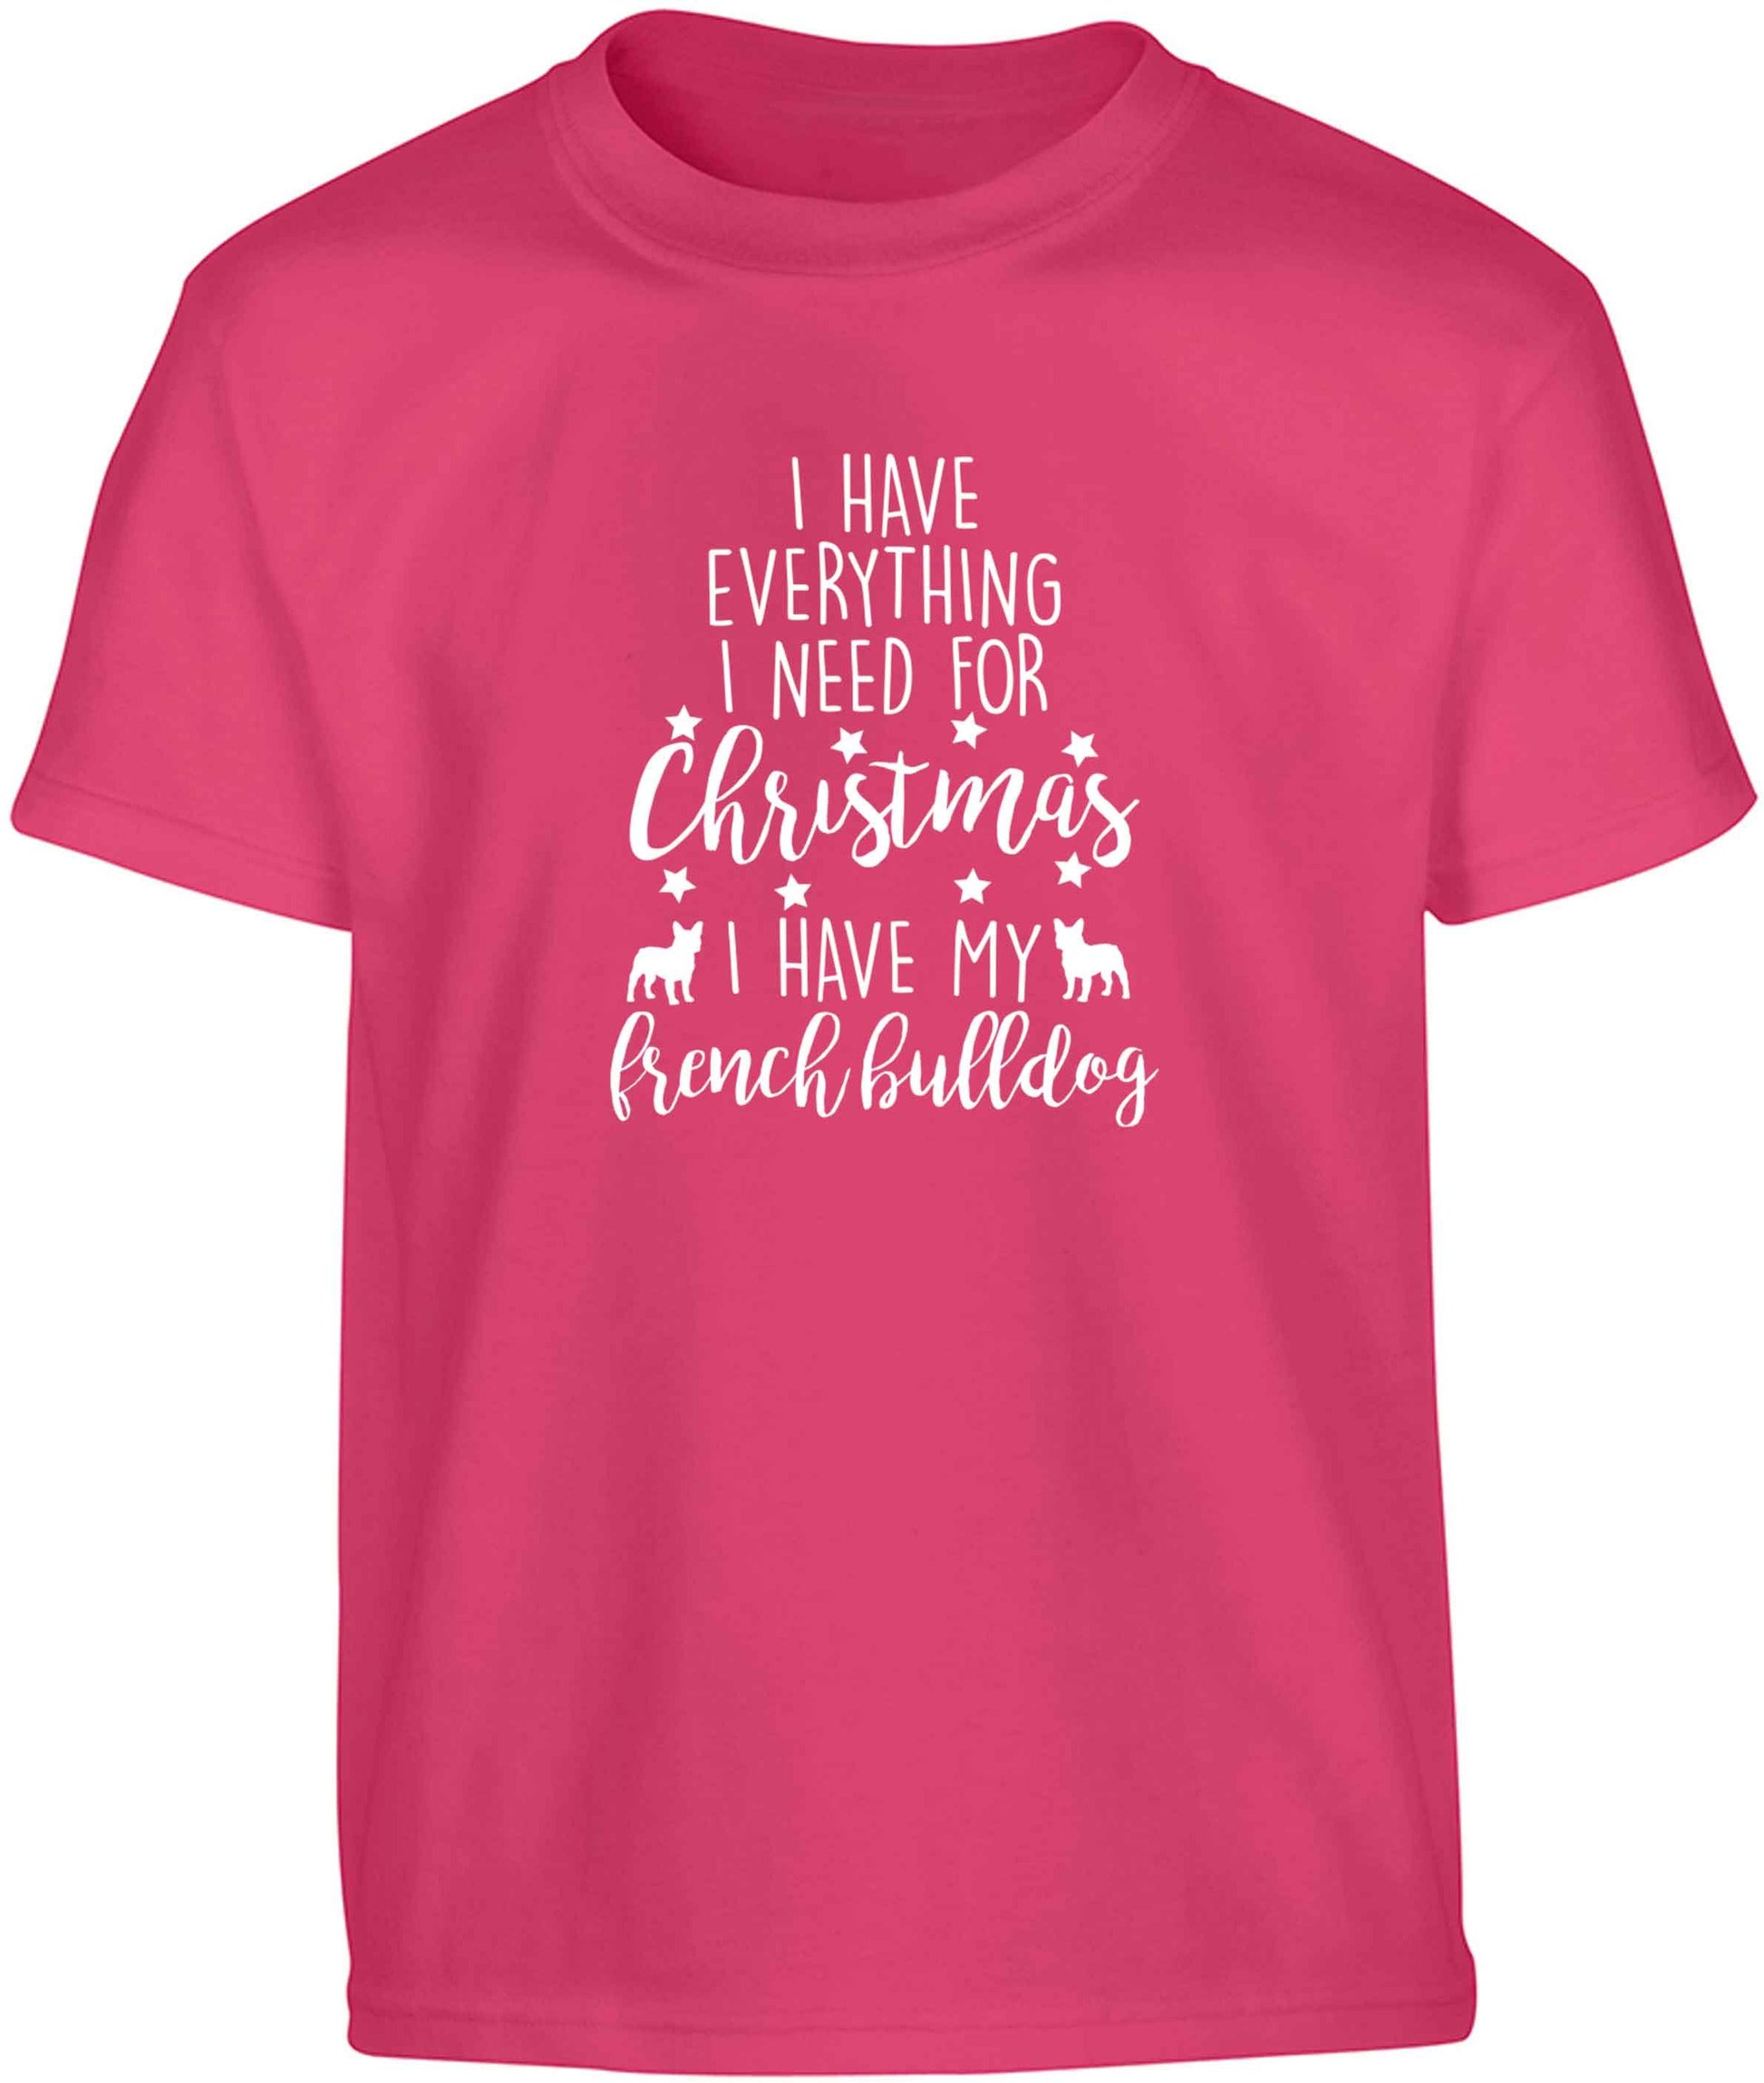 I have everything I need for Christmas I have my french bulldog Children's pink Tshirt 12-13 Years